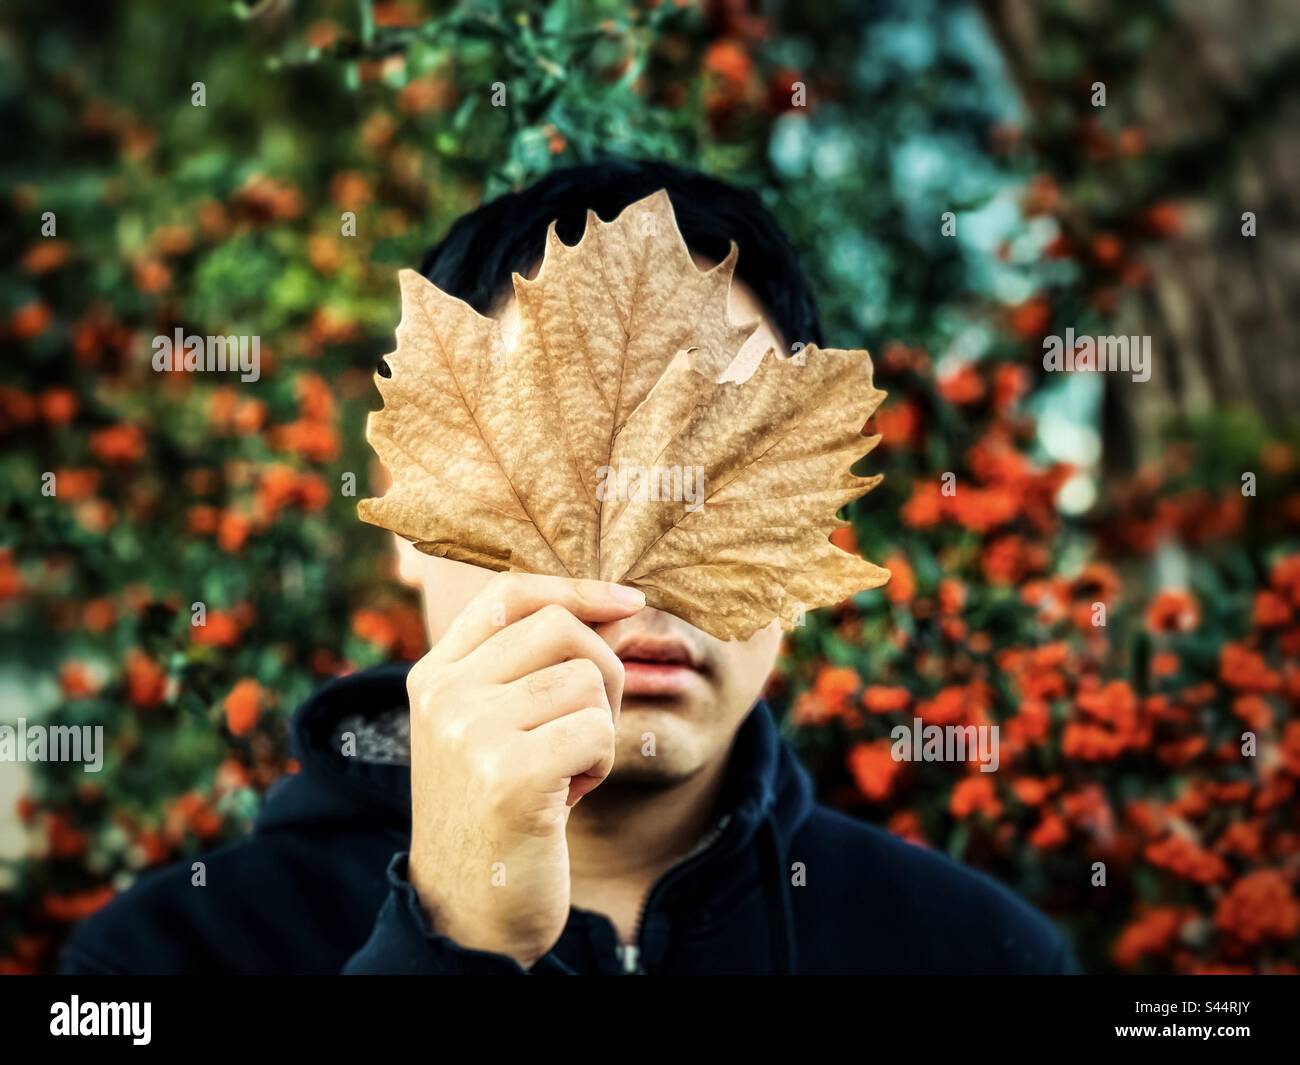 Close-up portrait of young man holding a large dried autumn leaf in front of his face against orange Cotoneaster berry bushes. Goblincore. Autumn theme. Obscured face. Mask. Stock Photo